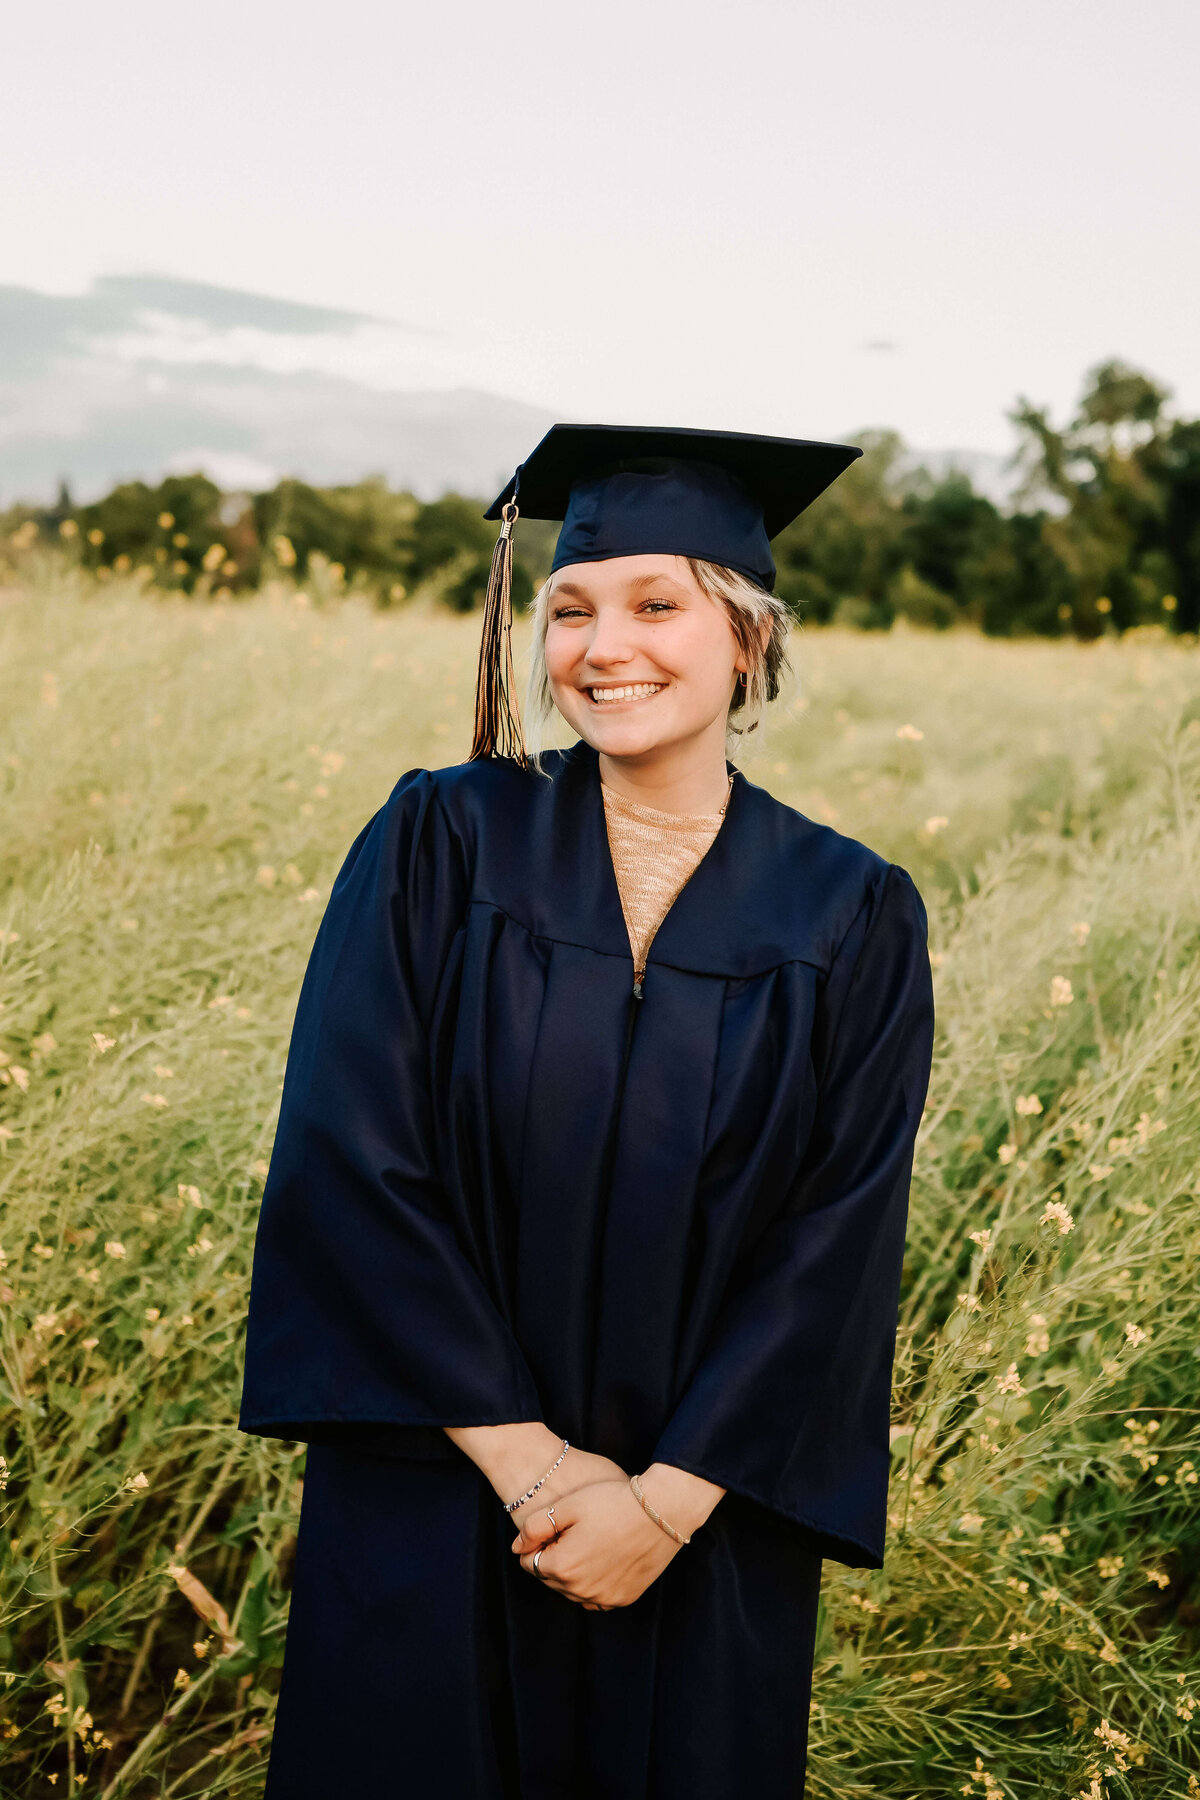 A West Albany High School graduate poses in a field for senior portraits. She's wearing a dark blue cap and gown.